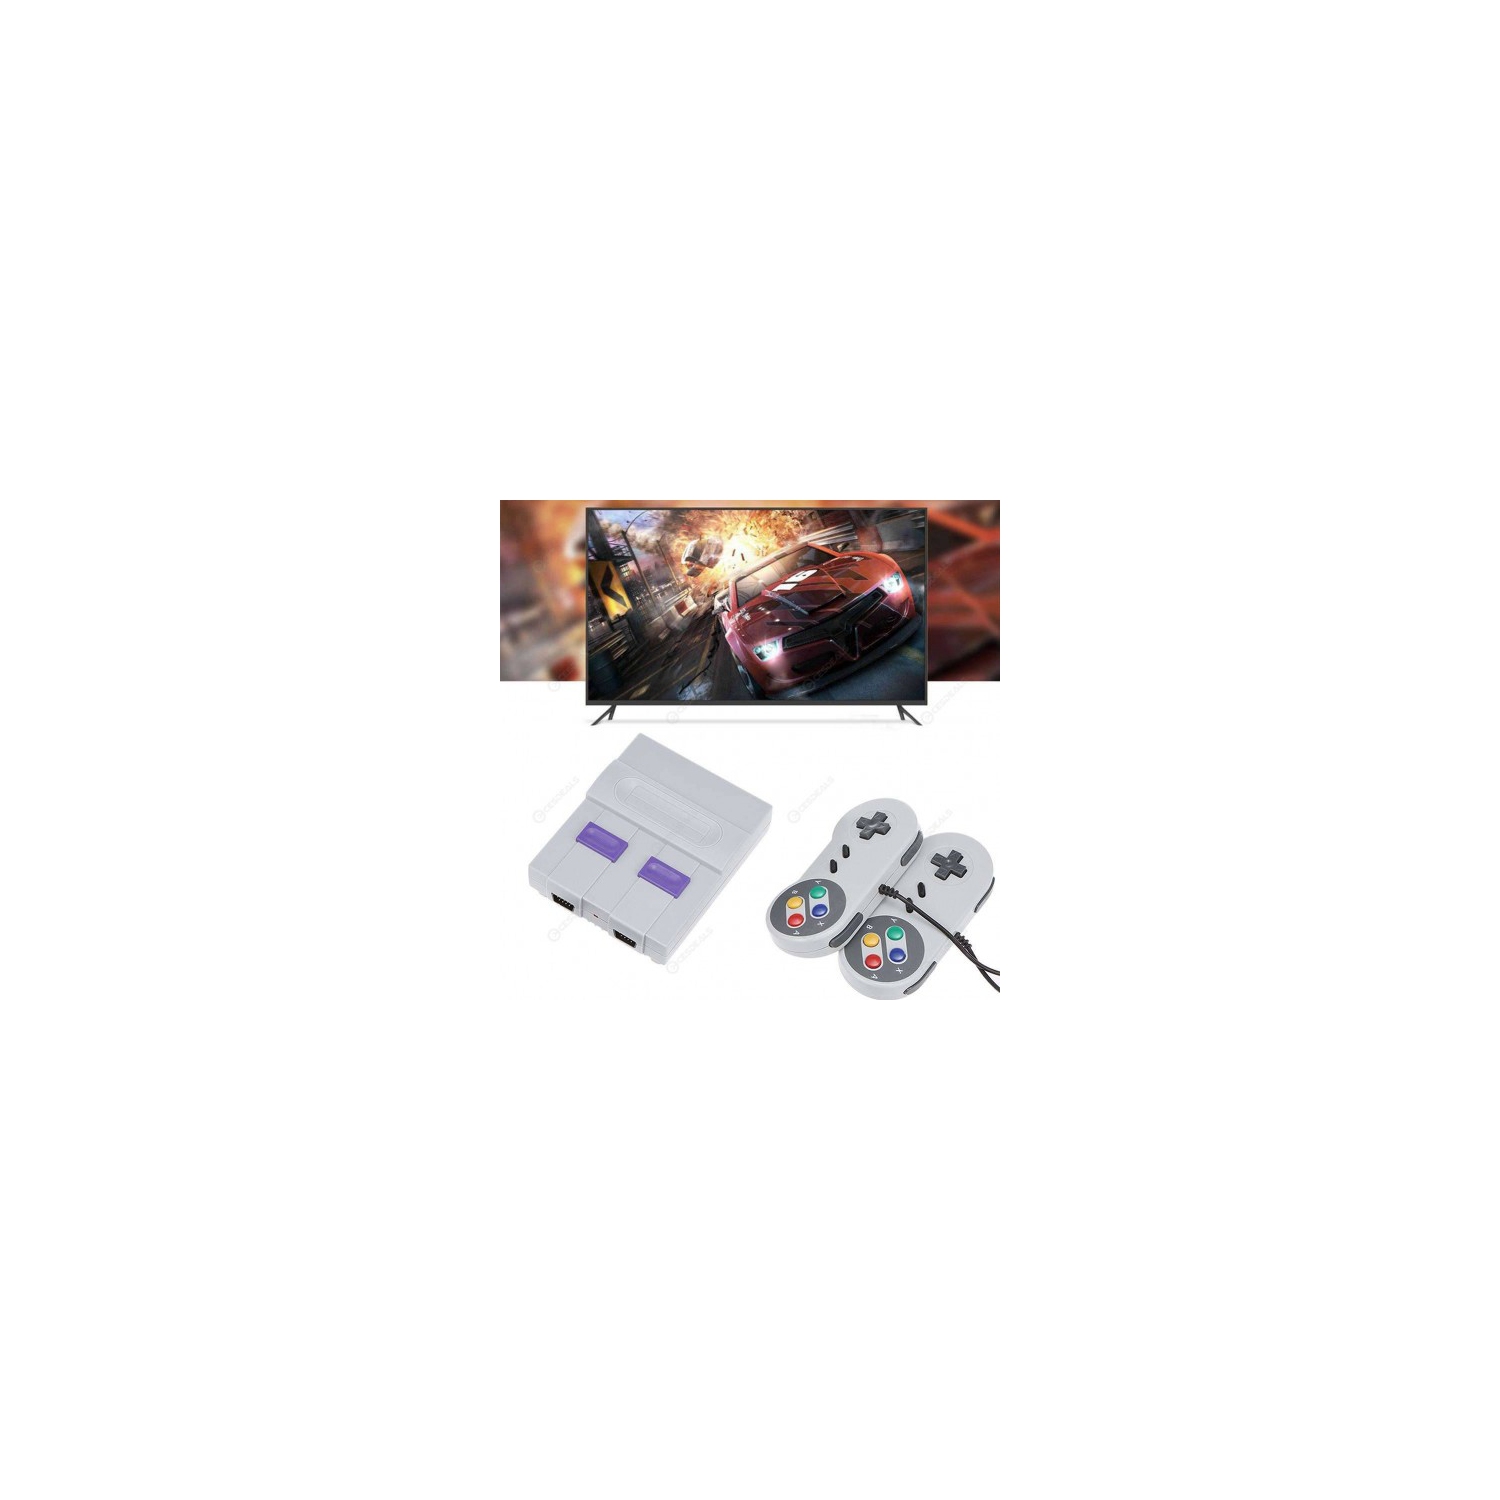 HDMI TV Retro Video Game Console Built-In 821 Classic Games with Remote